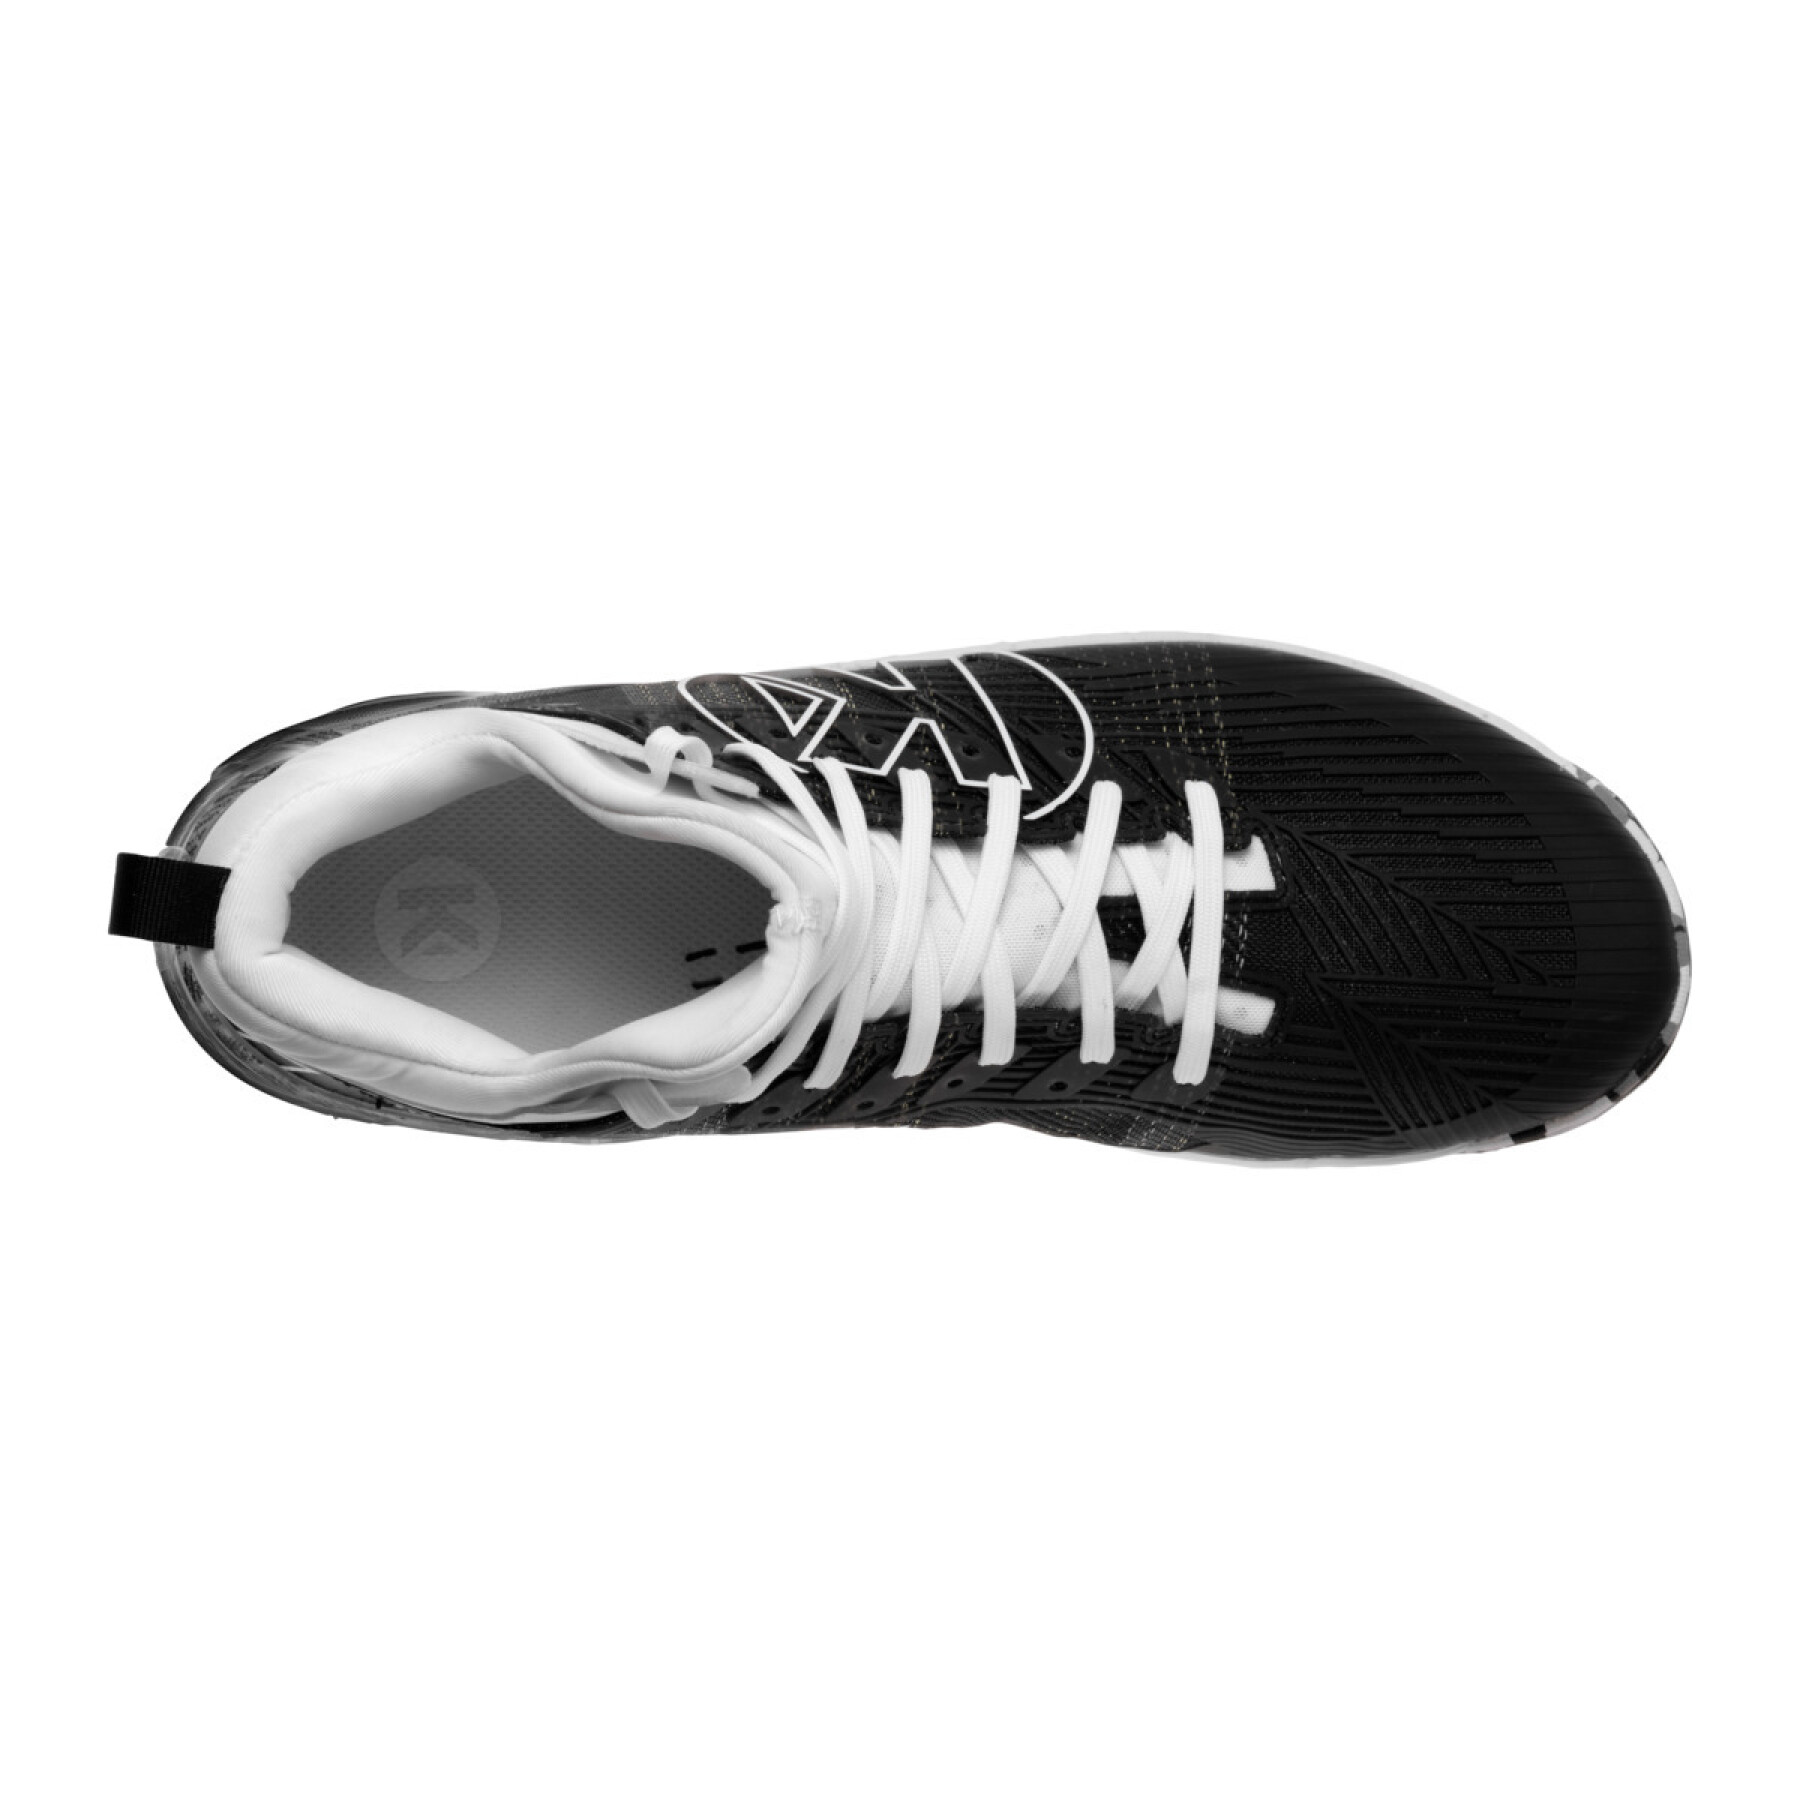 Indoor Sports Shoes Kempa Attack Mid